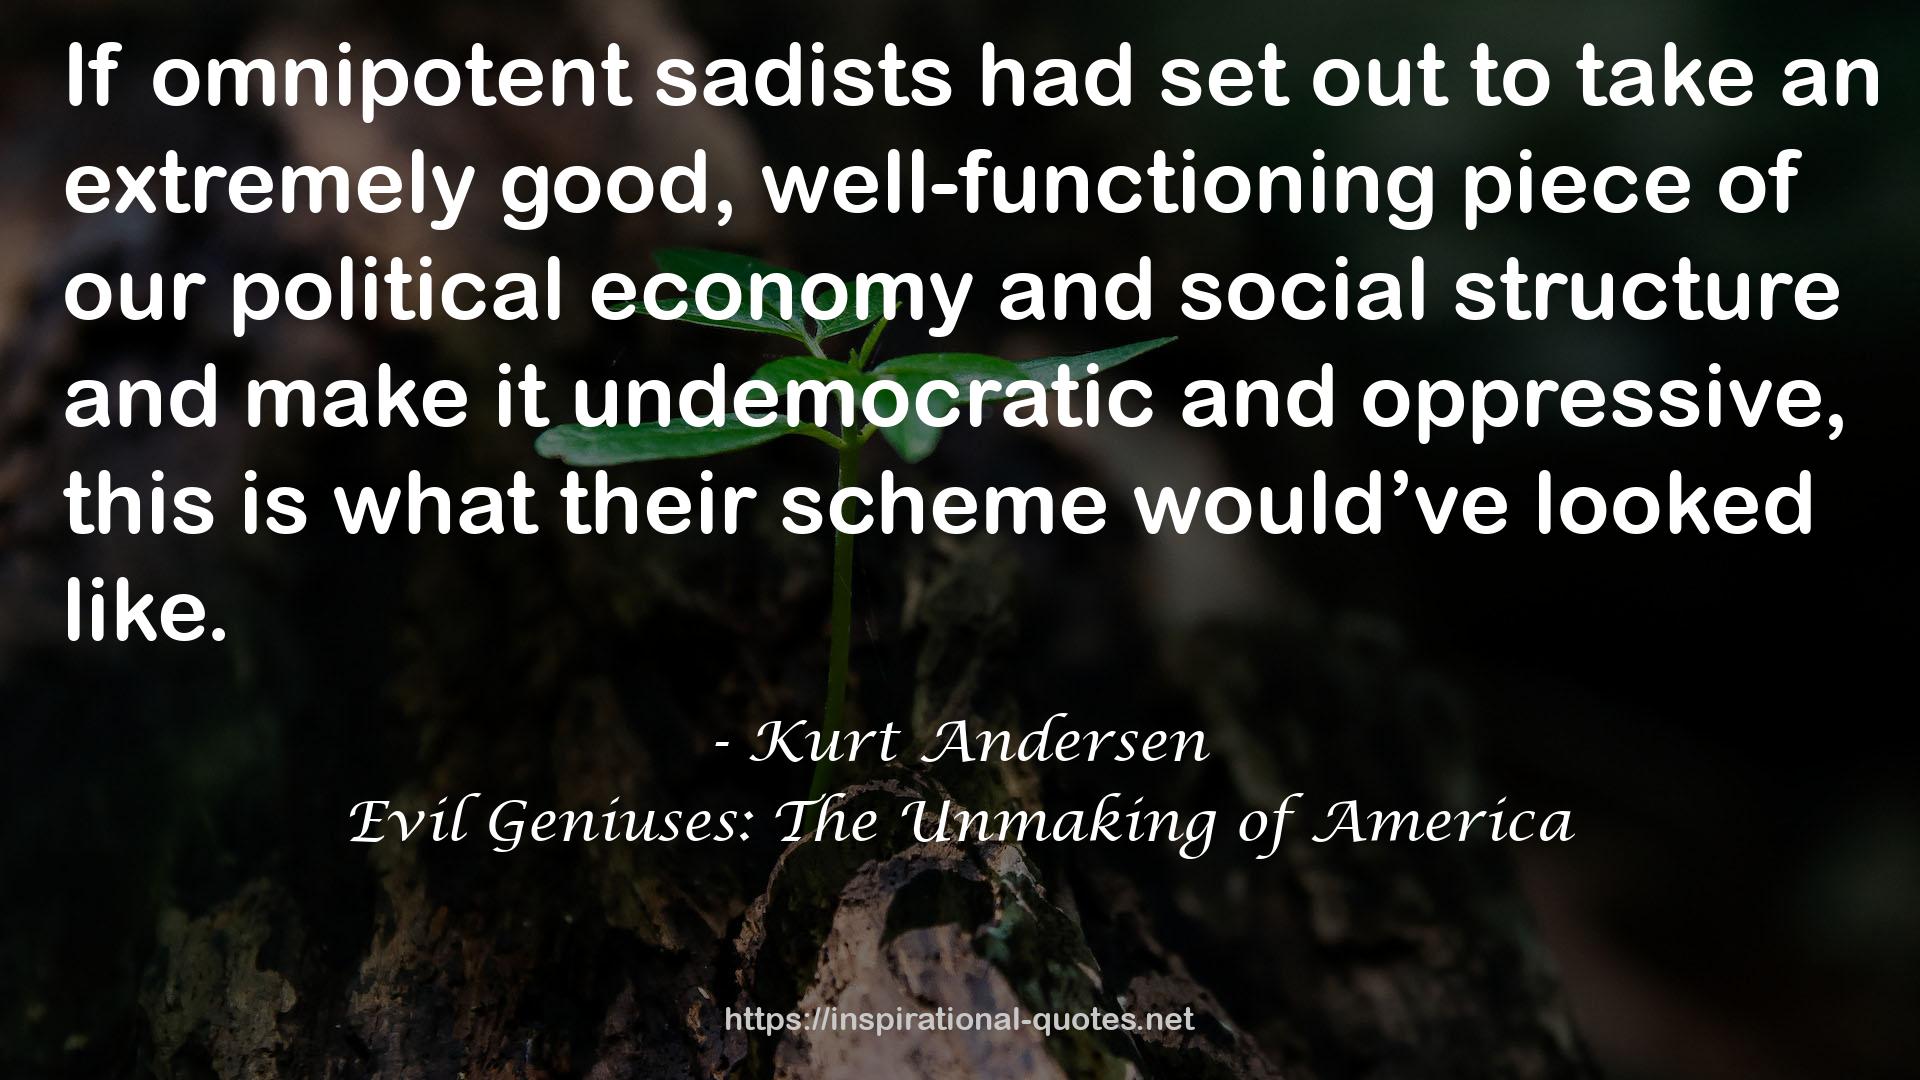 Evil Geniuses: The Unmaking of America QUOTES